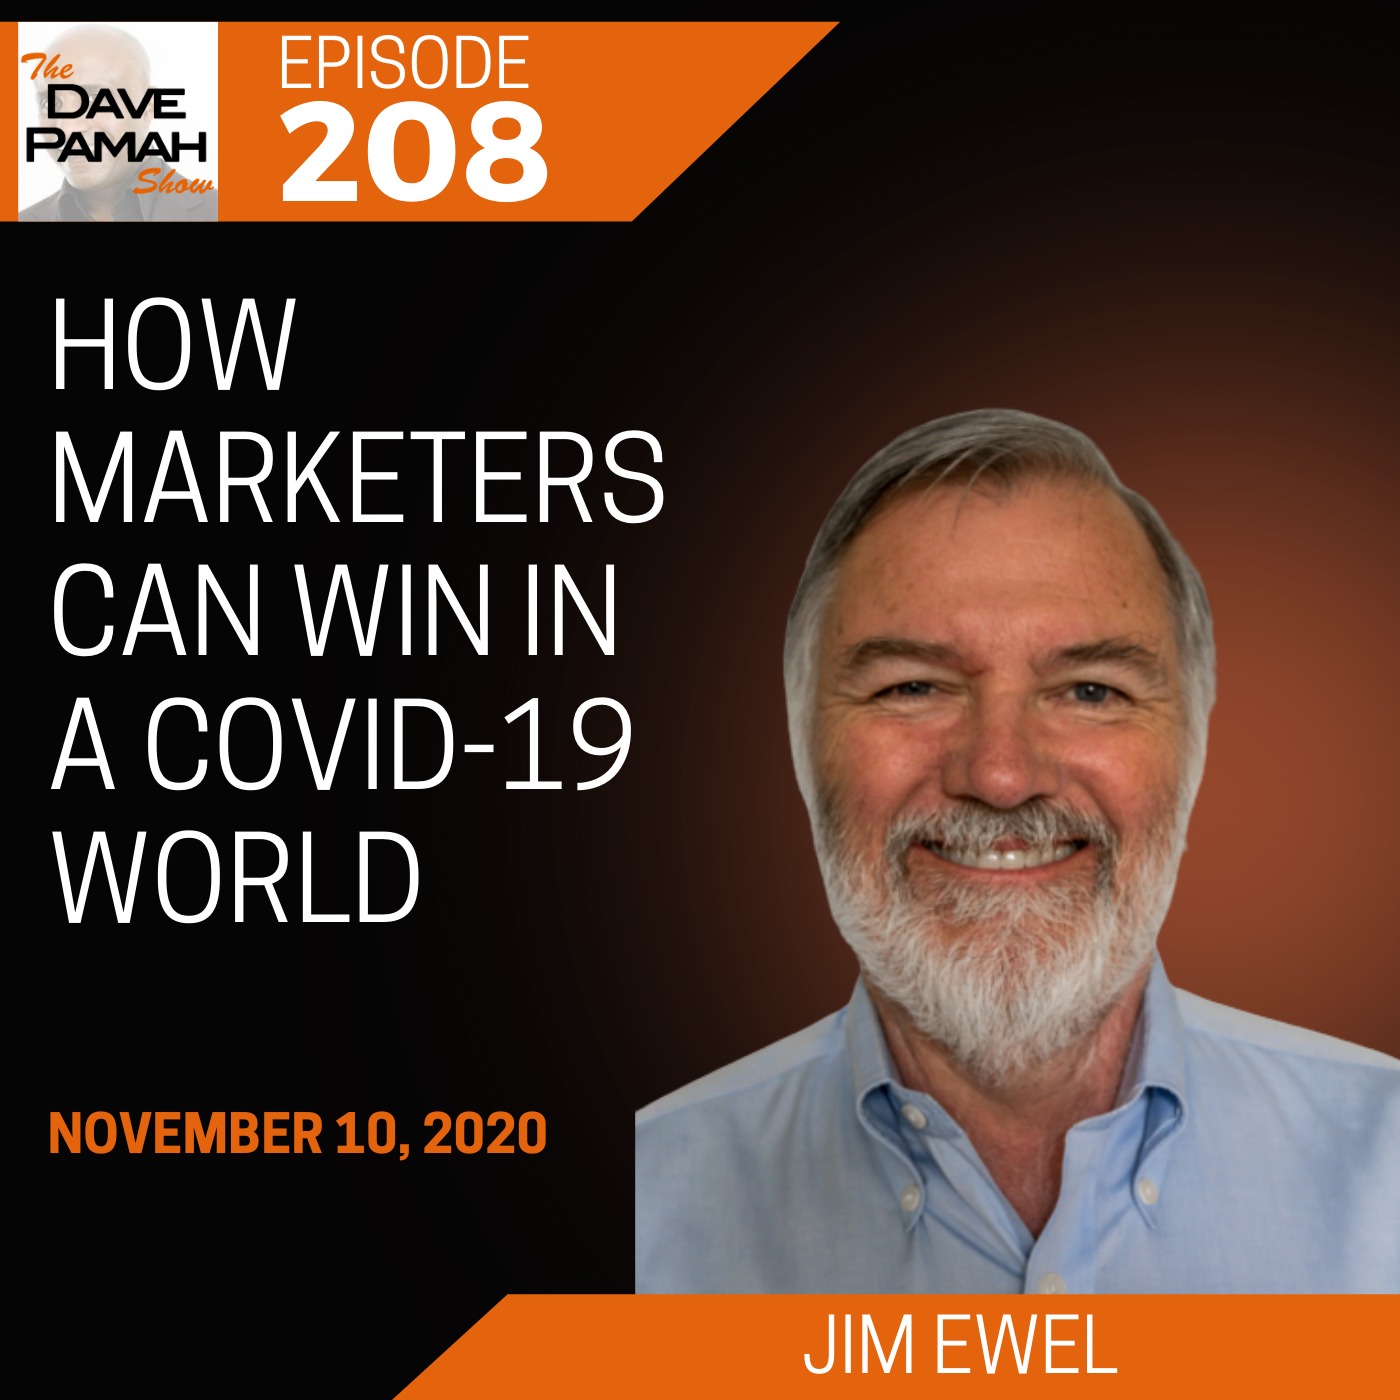 How marketers can win in a COVID-19 world with Jim Ewel Image